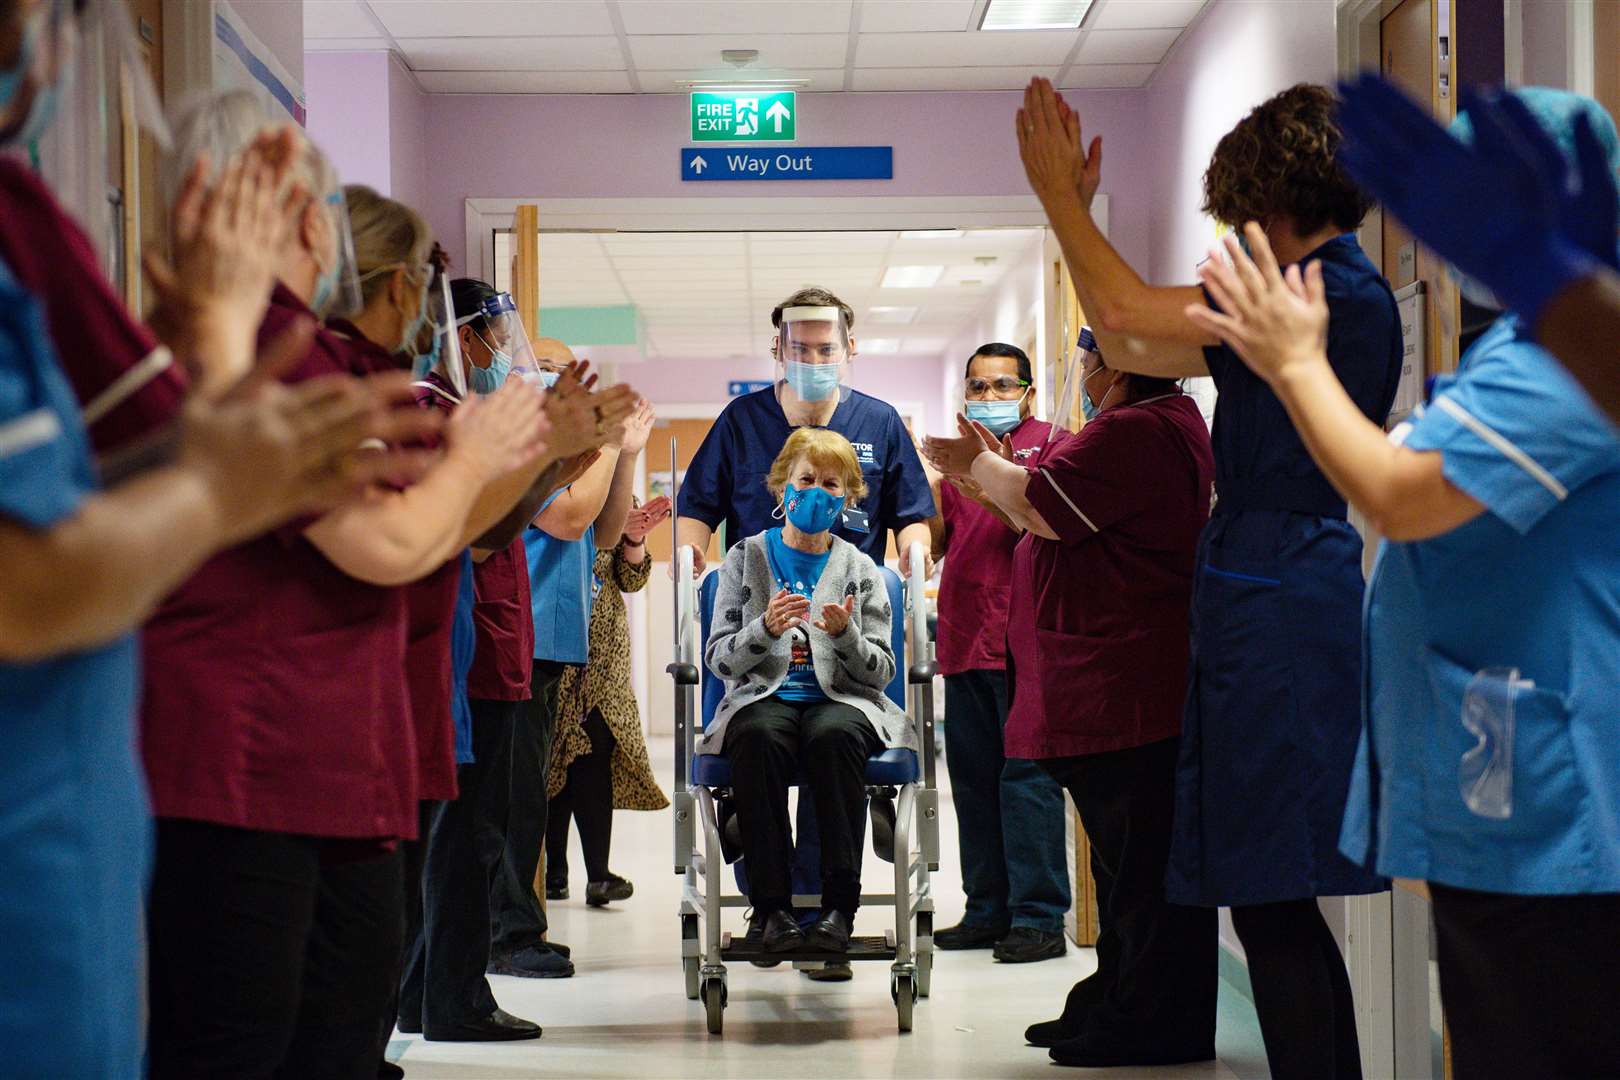 Margaret Keenan, 90, was applauded by staff as she returned to her ward after she became the first person in the United Kingdom to receive the Pfizer/BioNTech Covid-19 vaccine at University Hospital, Coventry, at the start of the largest ever immunisation programme in the UK’s history (Jacob King/PA)